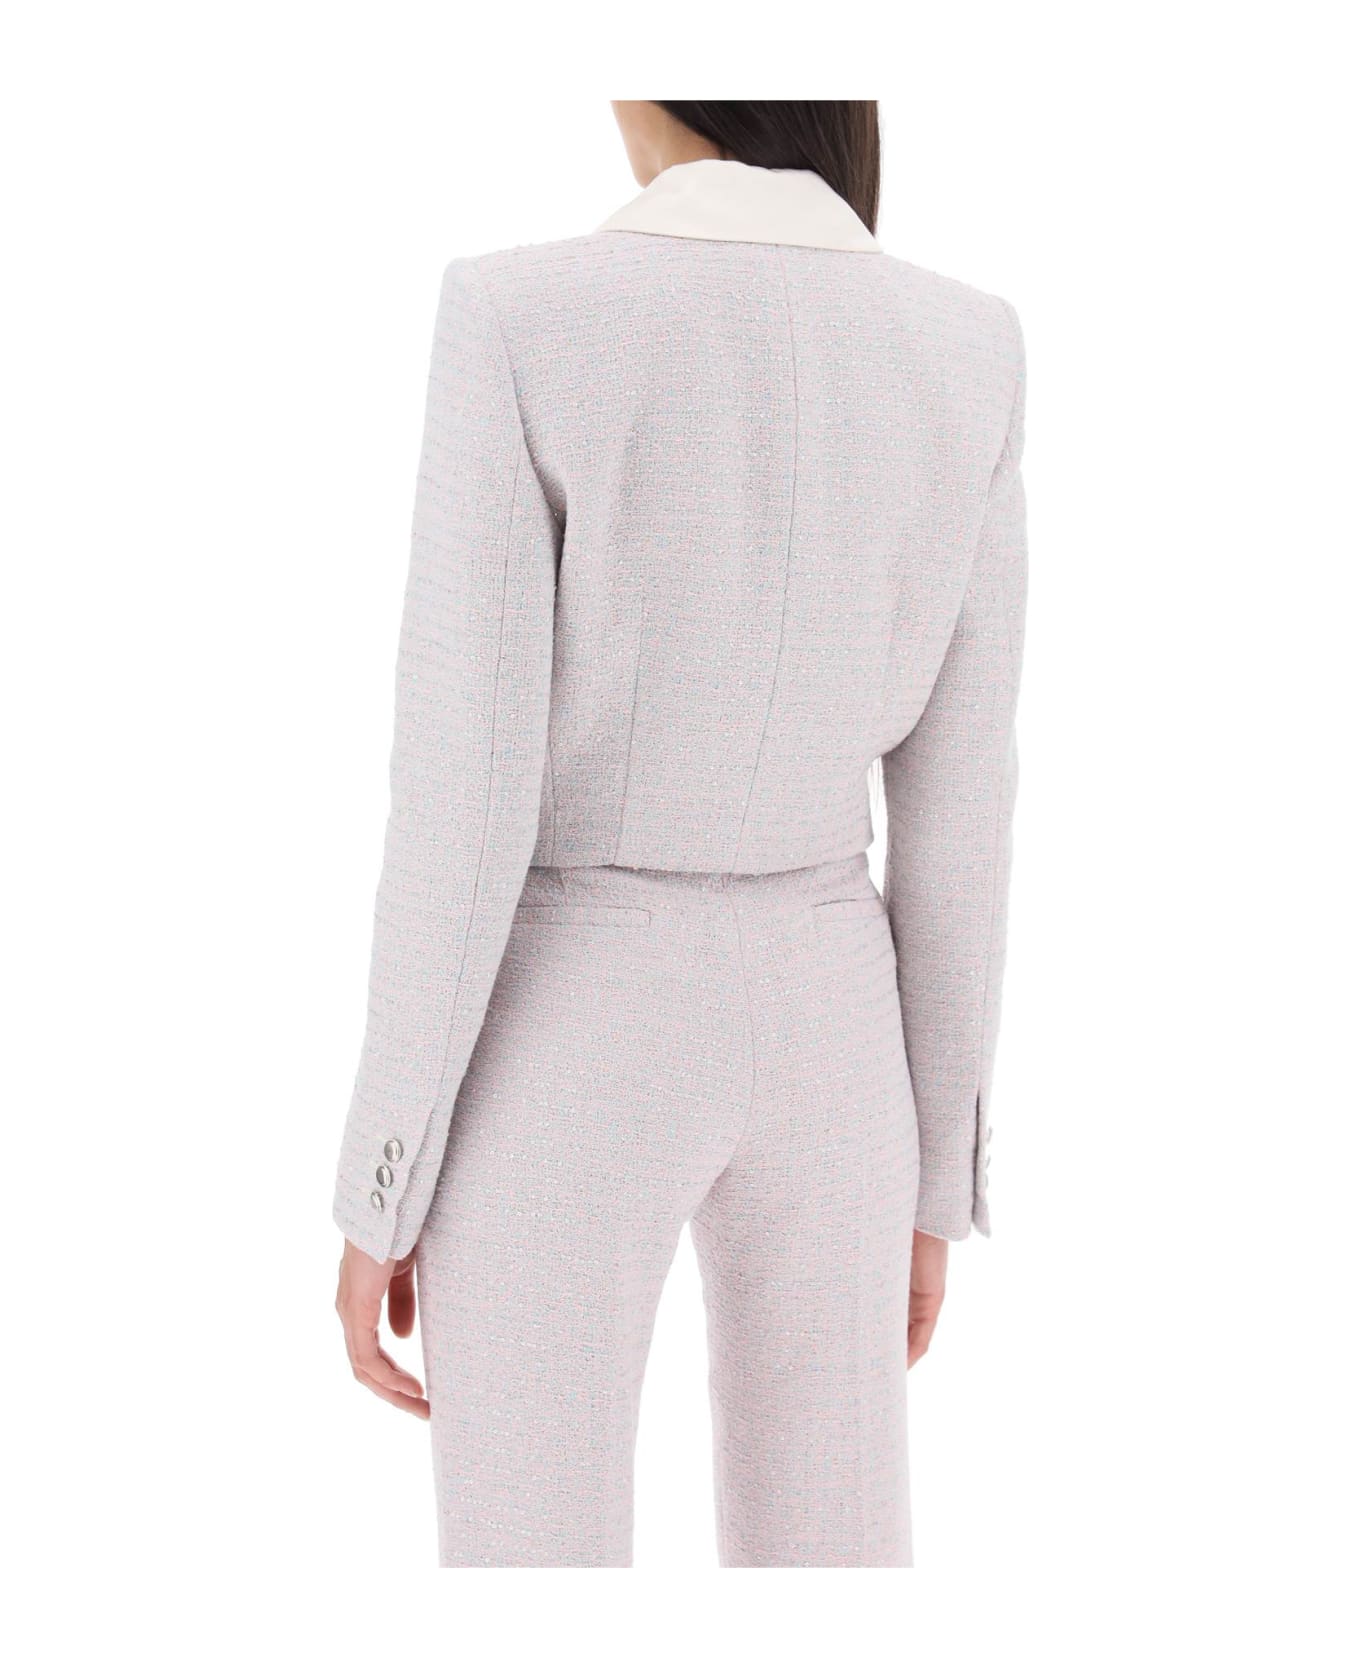 Alessandra Rich Cropped Jacket In Tweed Boucle' - LIGHT BLUE PINK (Light blue)